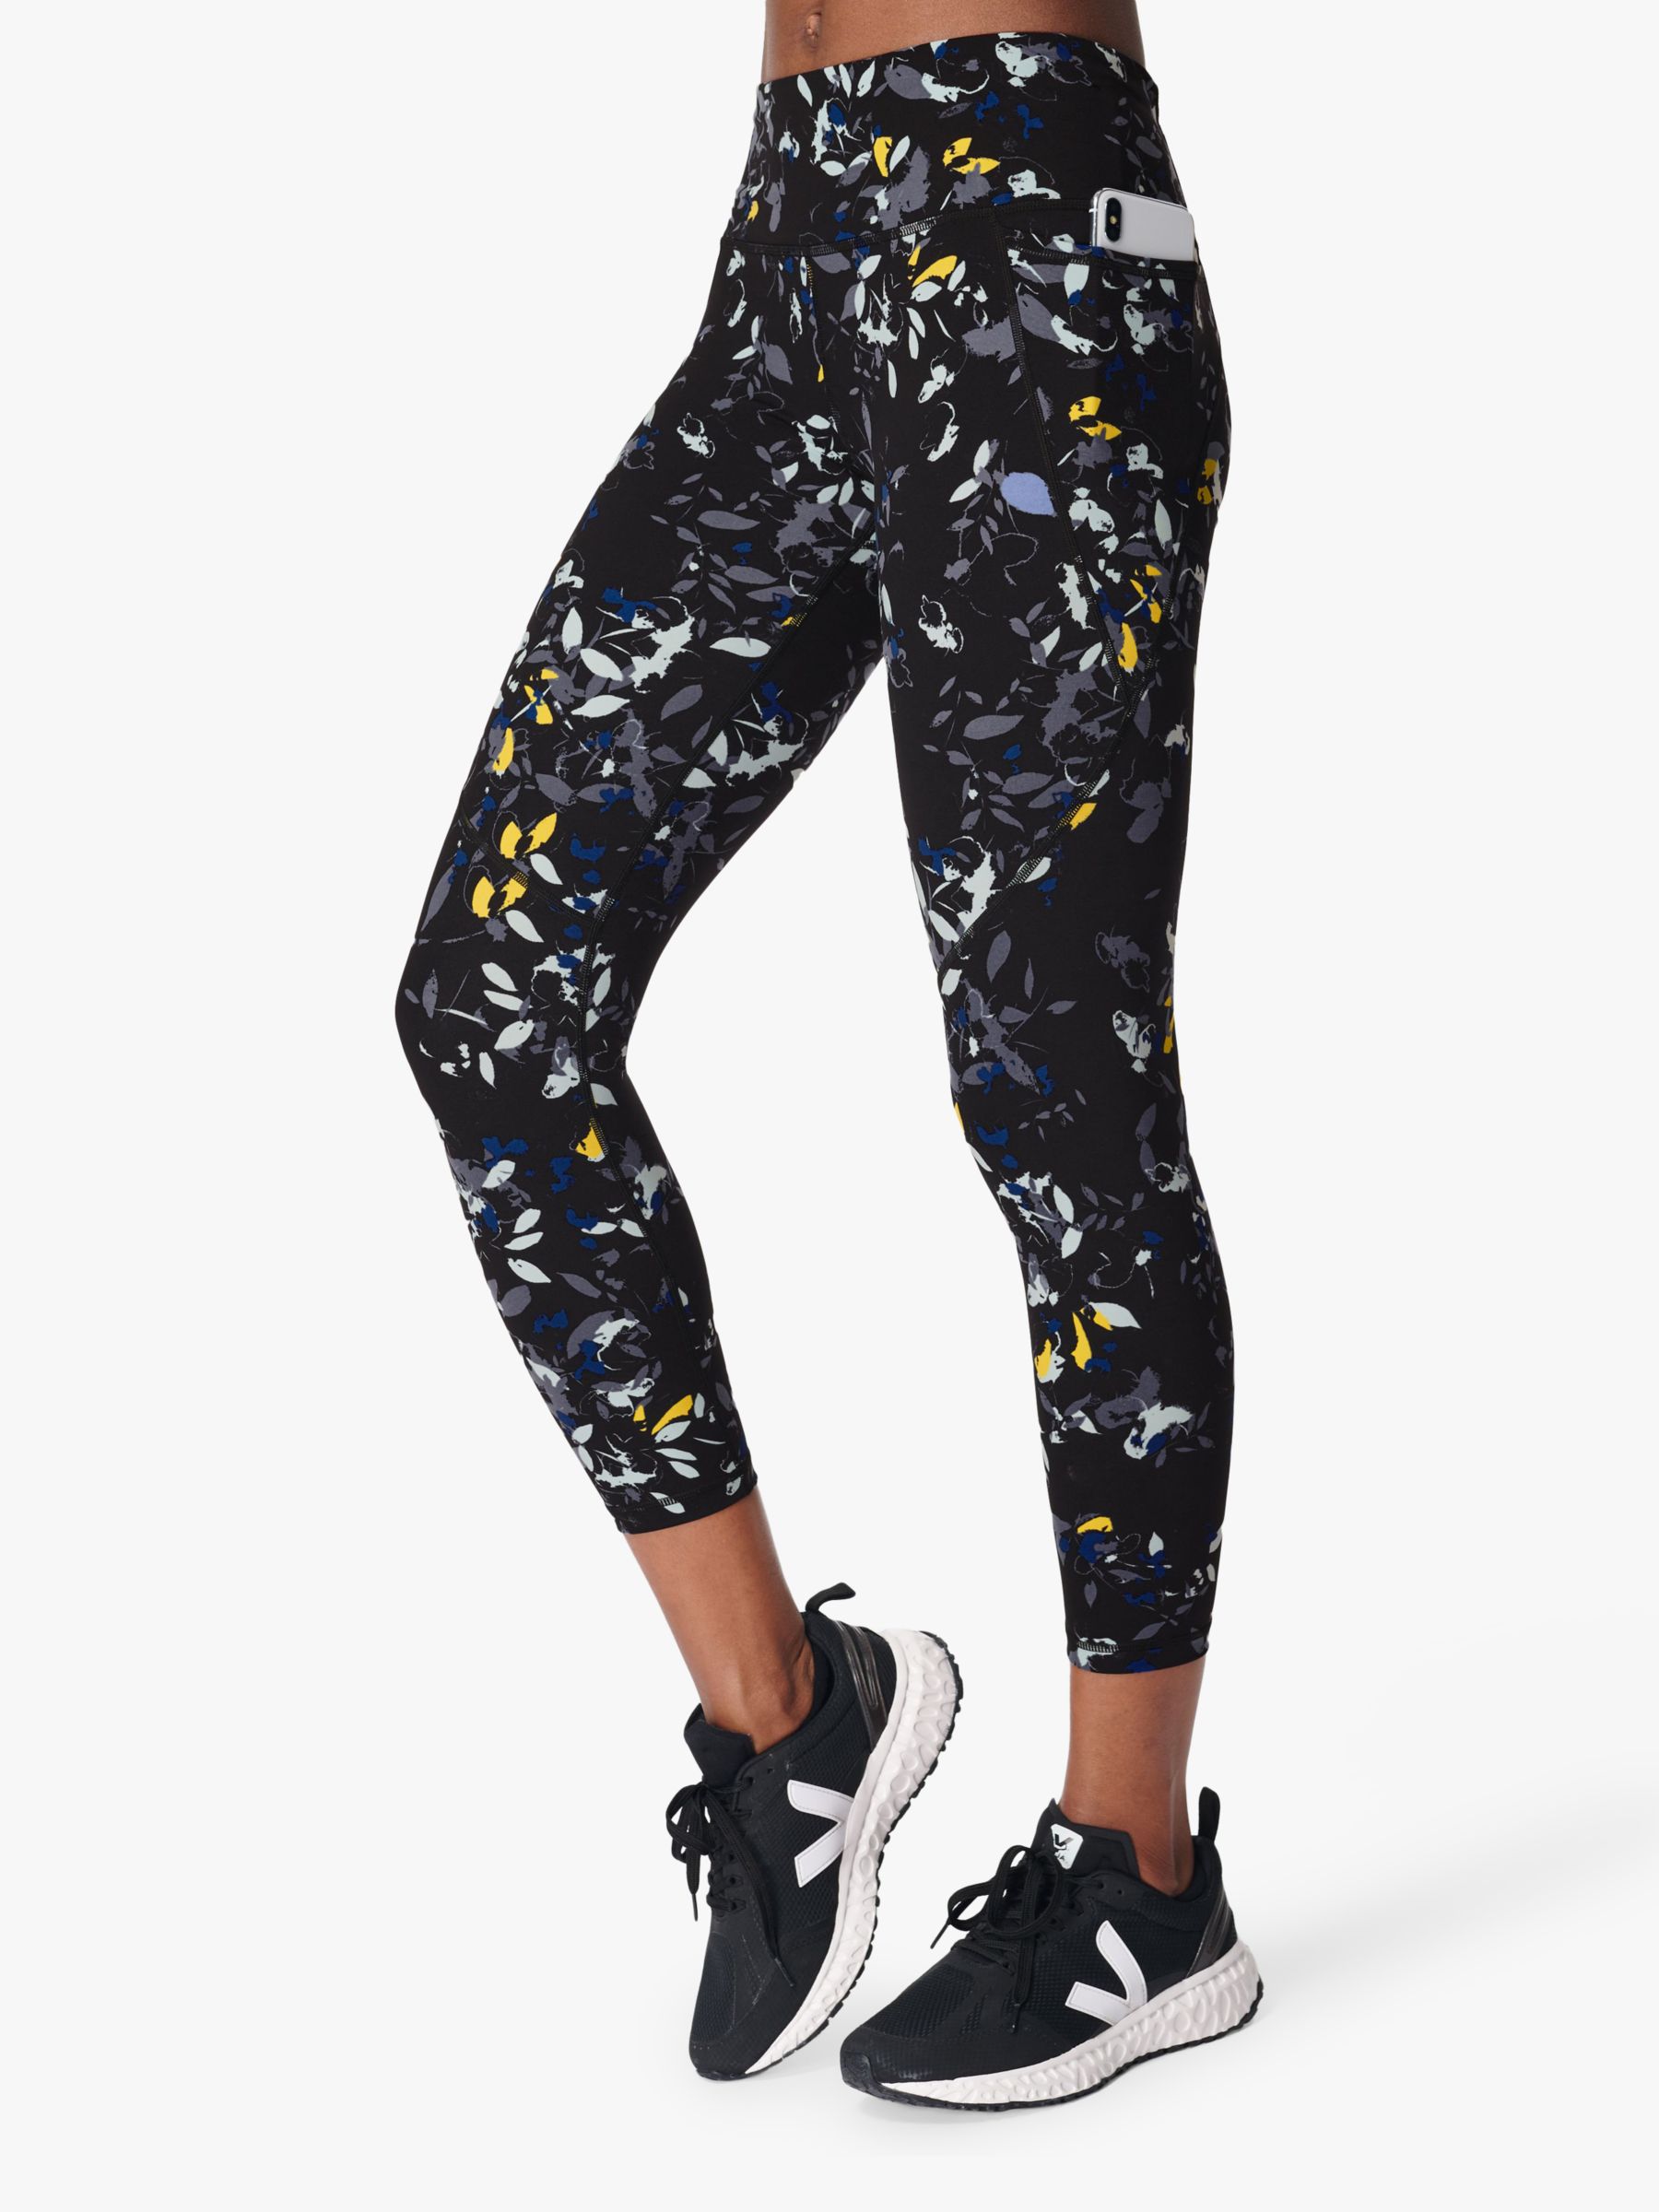 Sweaty Betty Power 7/8 Leggings Reviewed  International Society of  Precision Agriculture